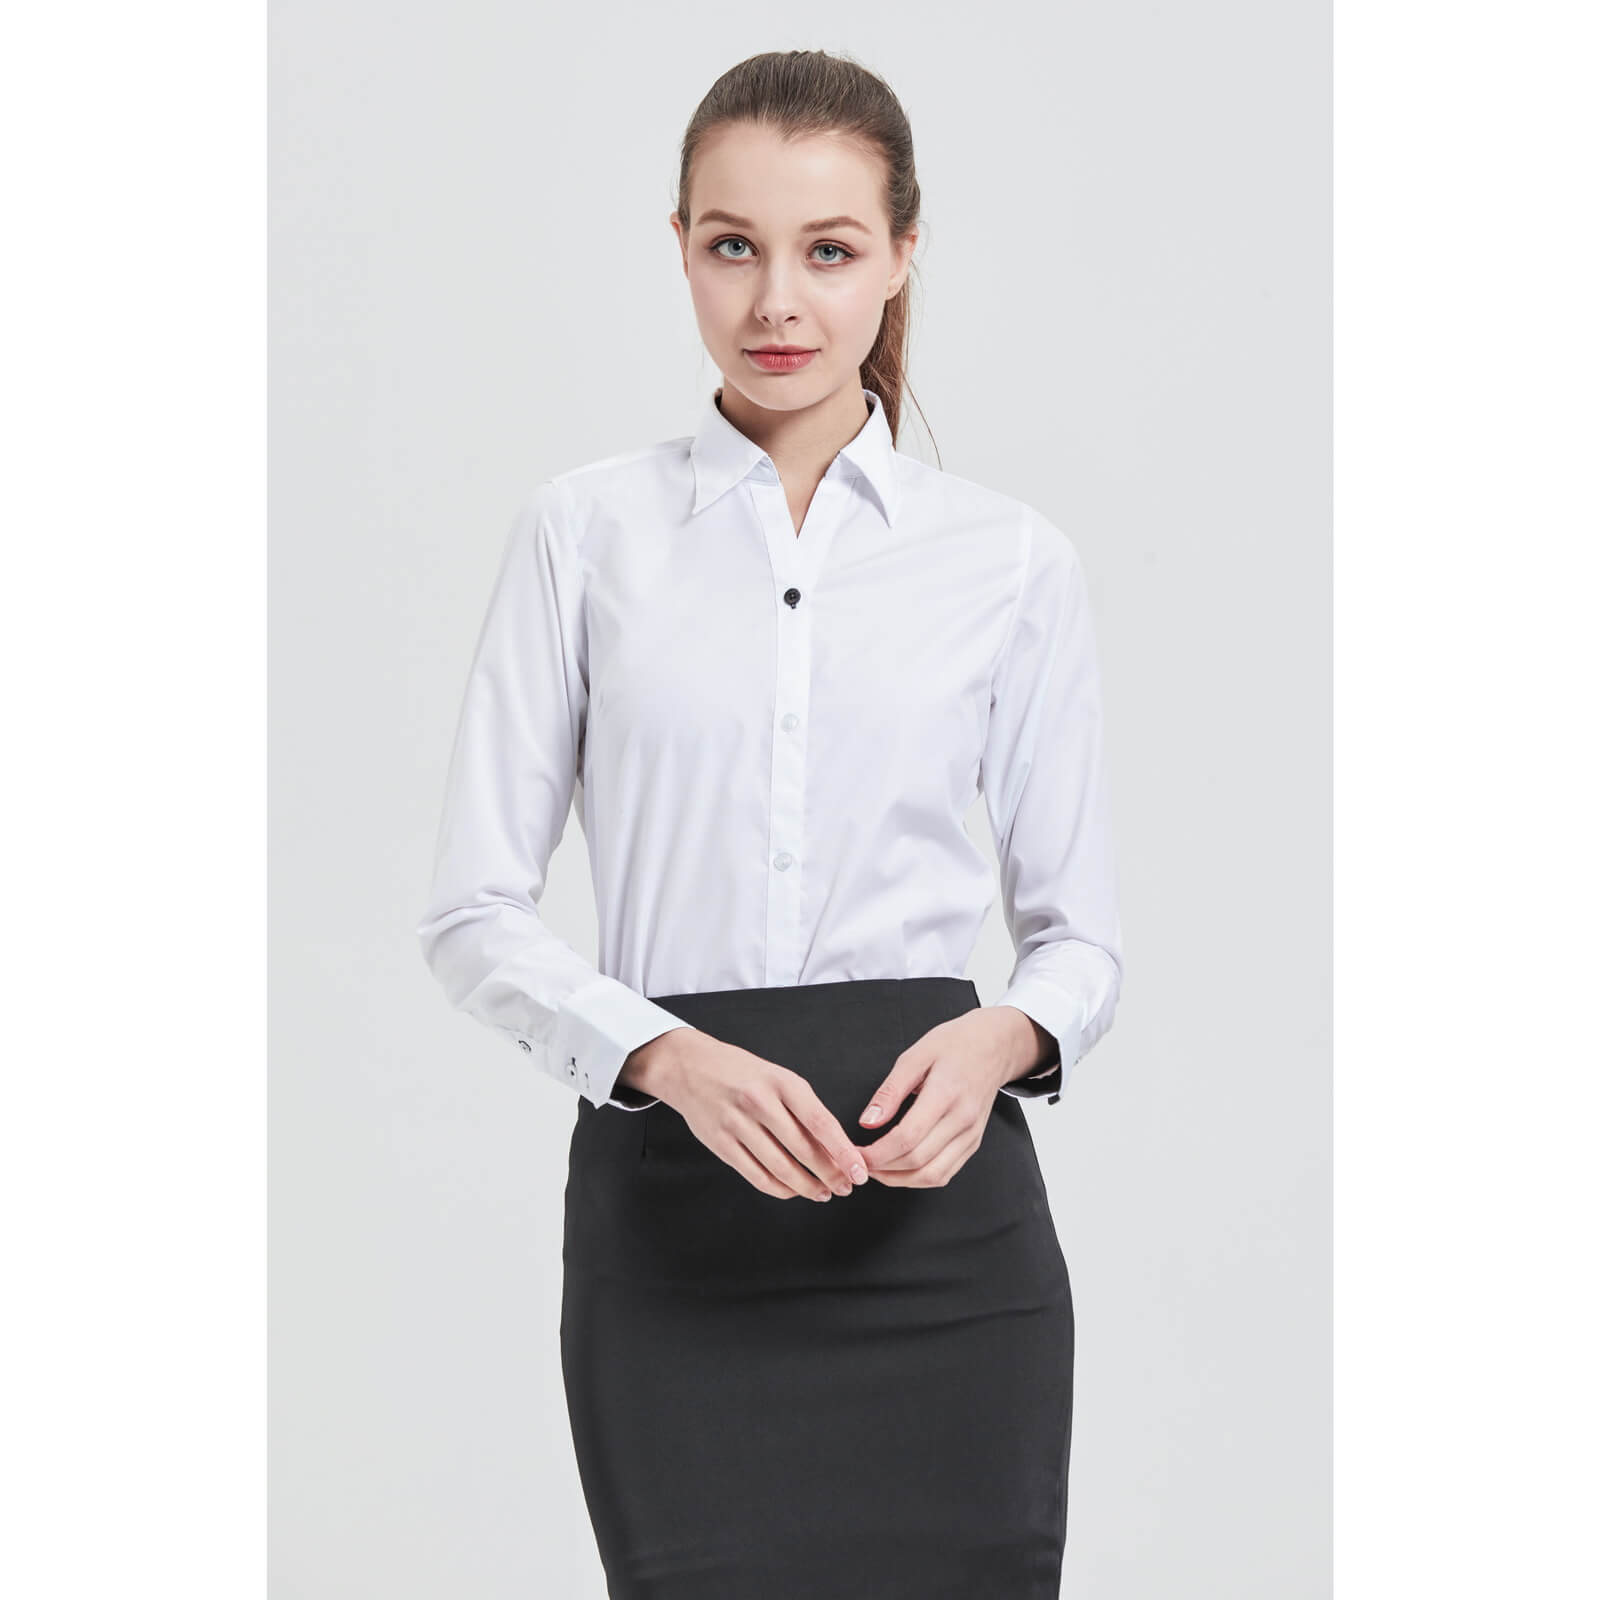 Business blouse